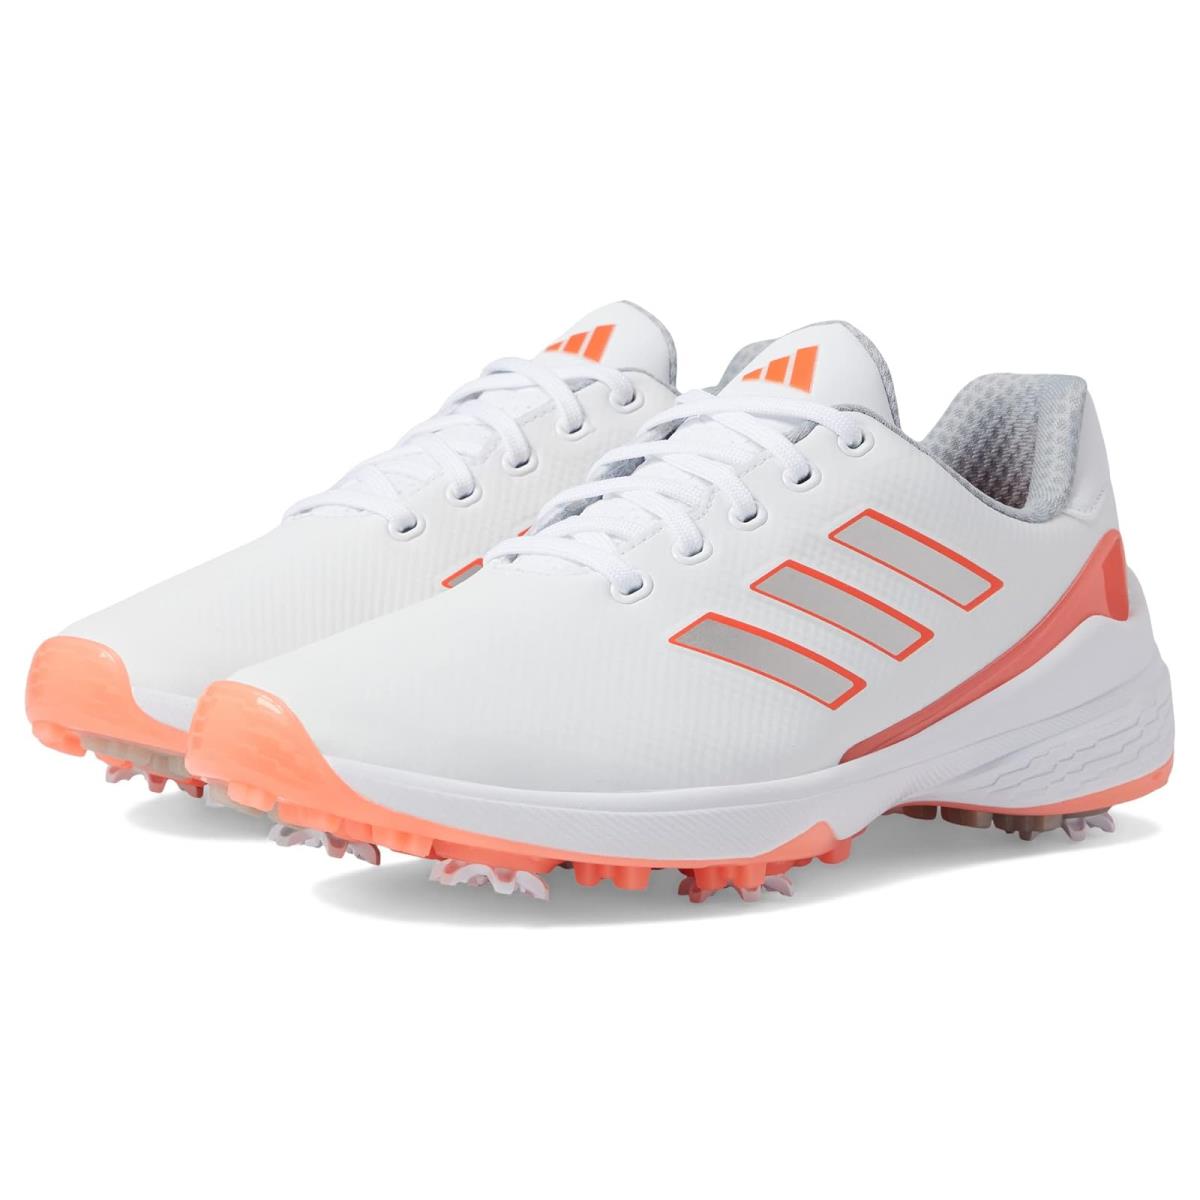 Woman`s Sneakers Athletic Shoes Adidas Golf ZG23 Lightstrike Golf Shoes Footwear White/Silver Metallic/Coral Fusion